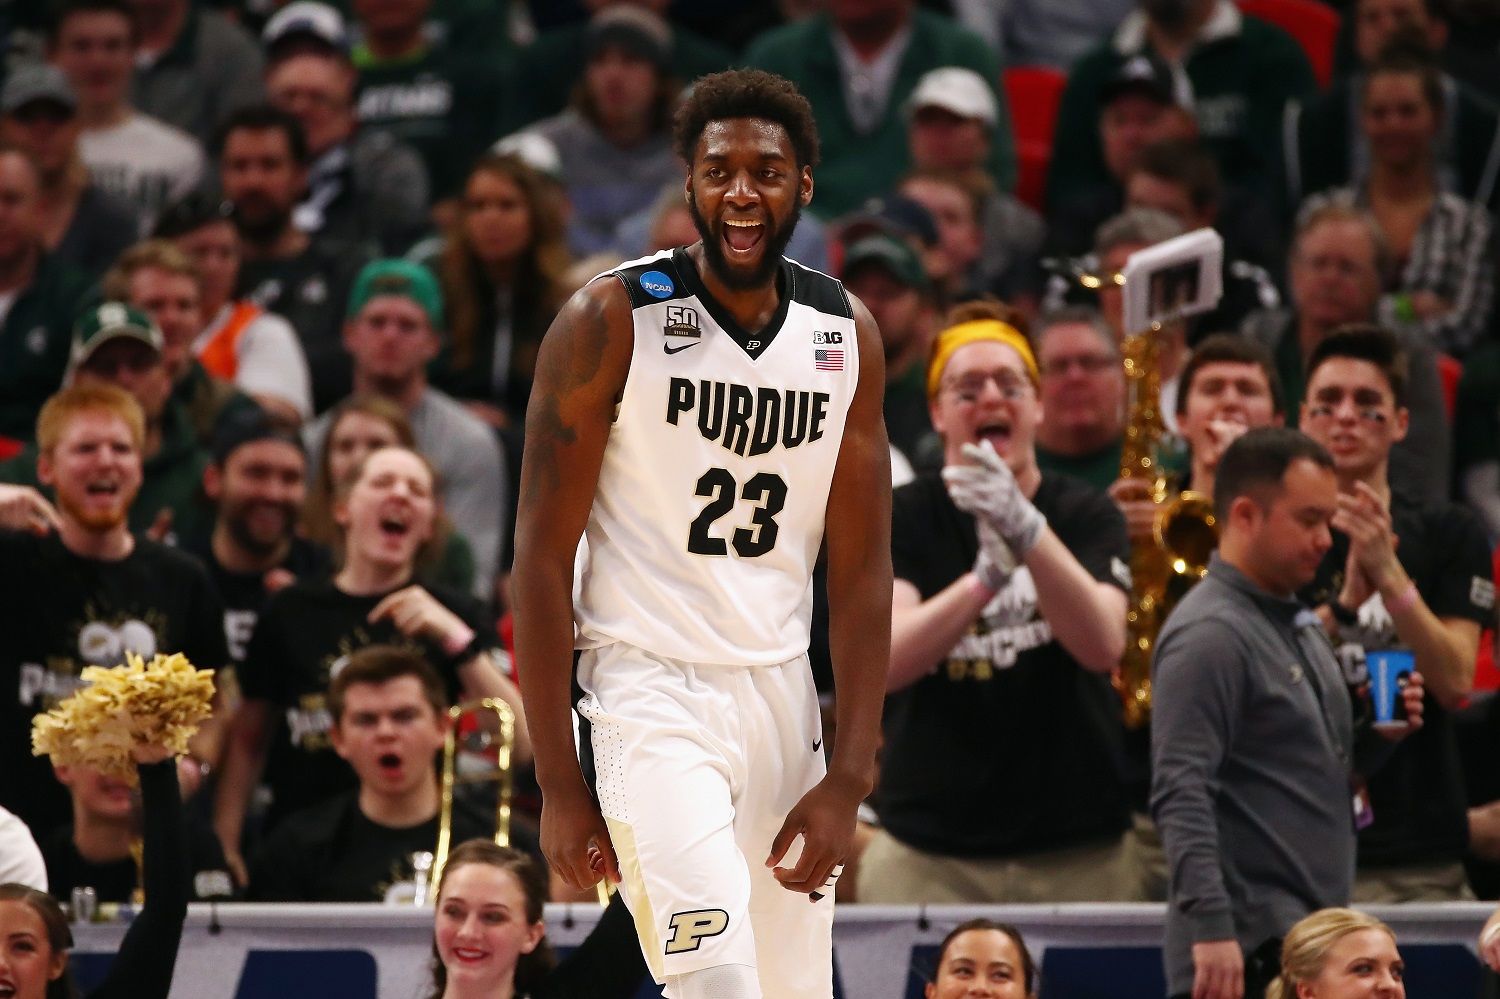 DETROIT, MI - MARCH 18:  Jacquil Taylor #23 of the Purdue Boilermakers reacts during the second half against the Butler Bulldogs in the second round of the 2018 NCAA Men's Basketball Tournament at Little Caesars Arena on March 18, 2018 in Detroit, Michigan.  (Photo by Gregory Shamus/Getty Images)